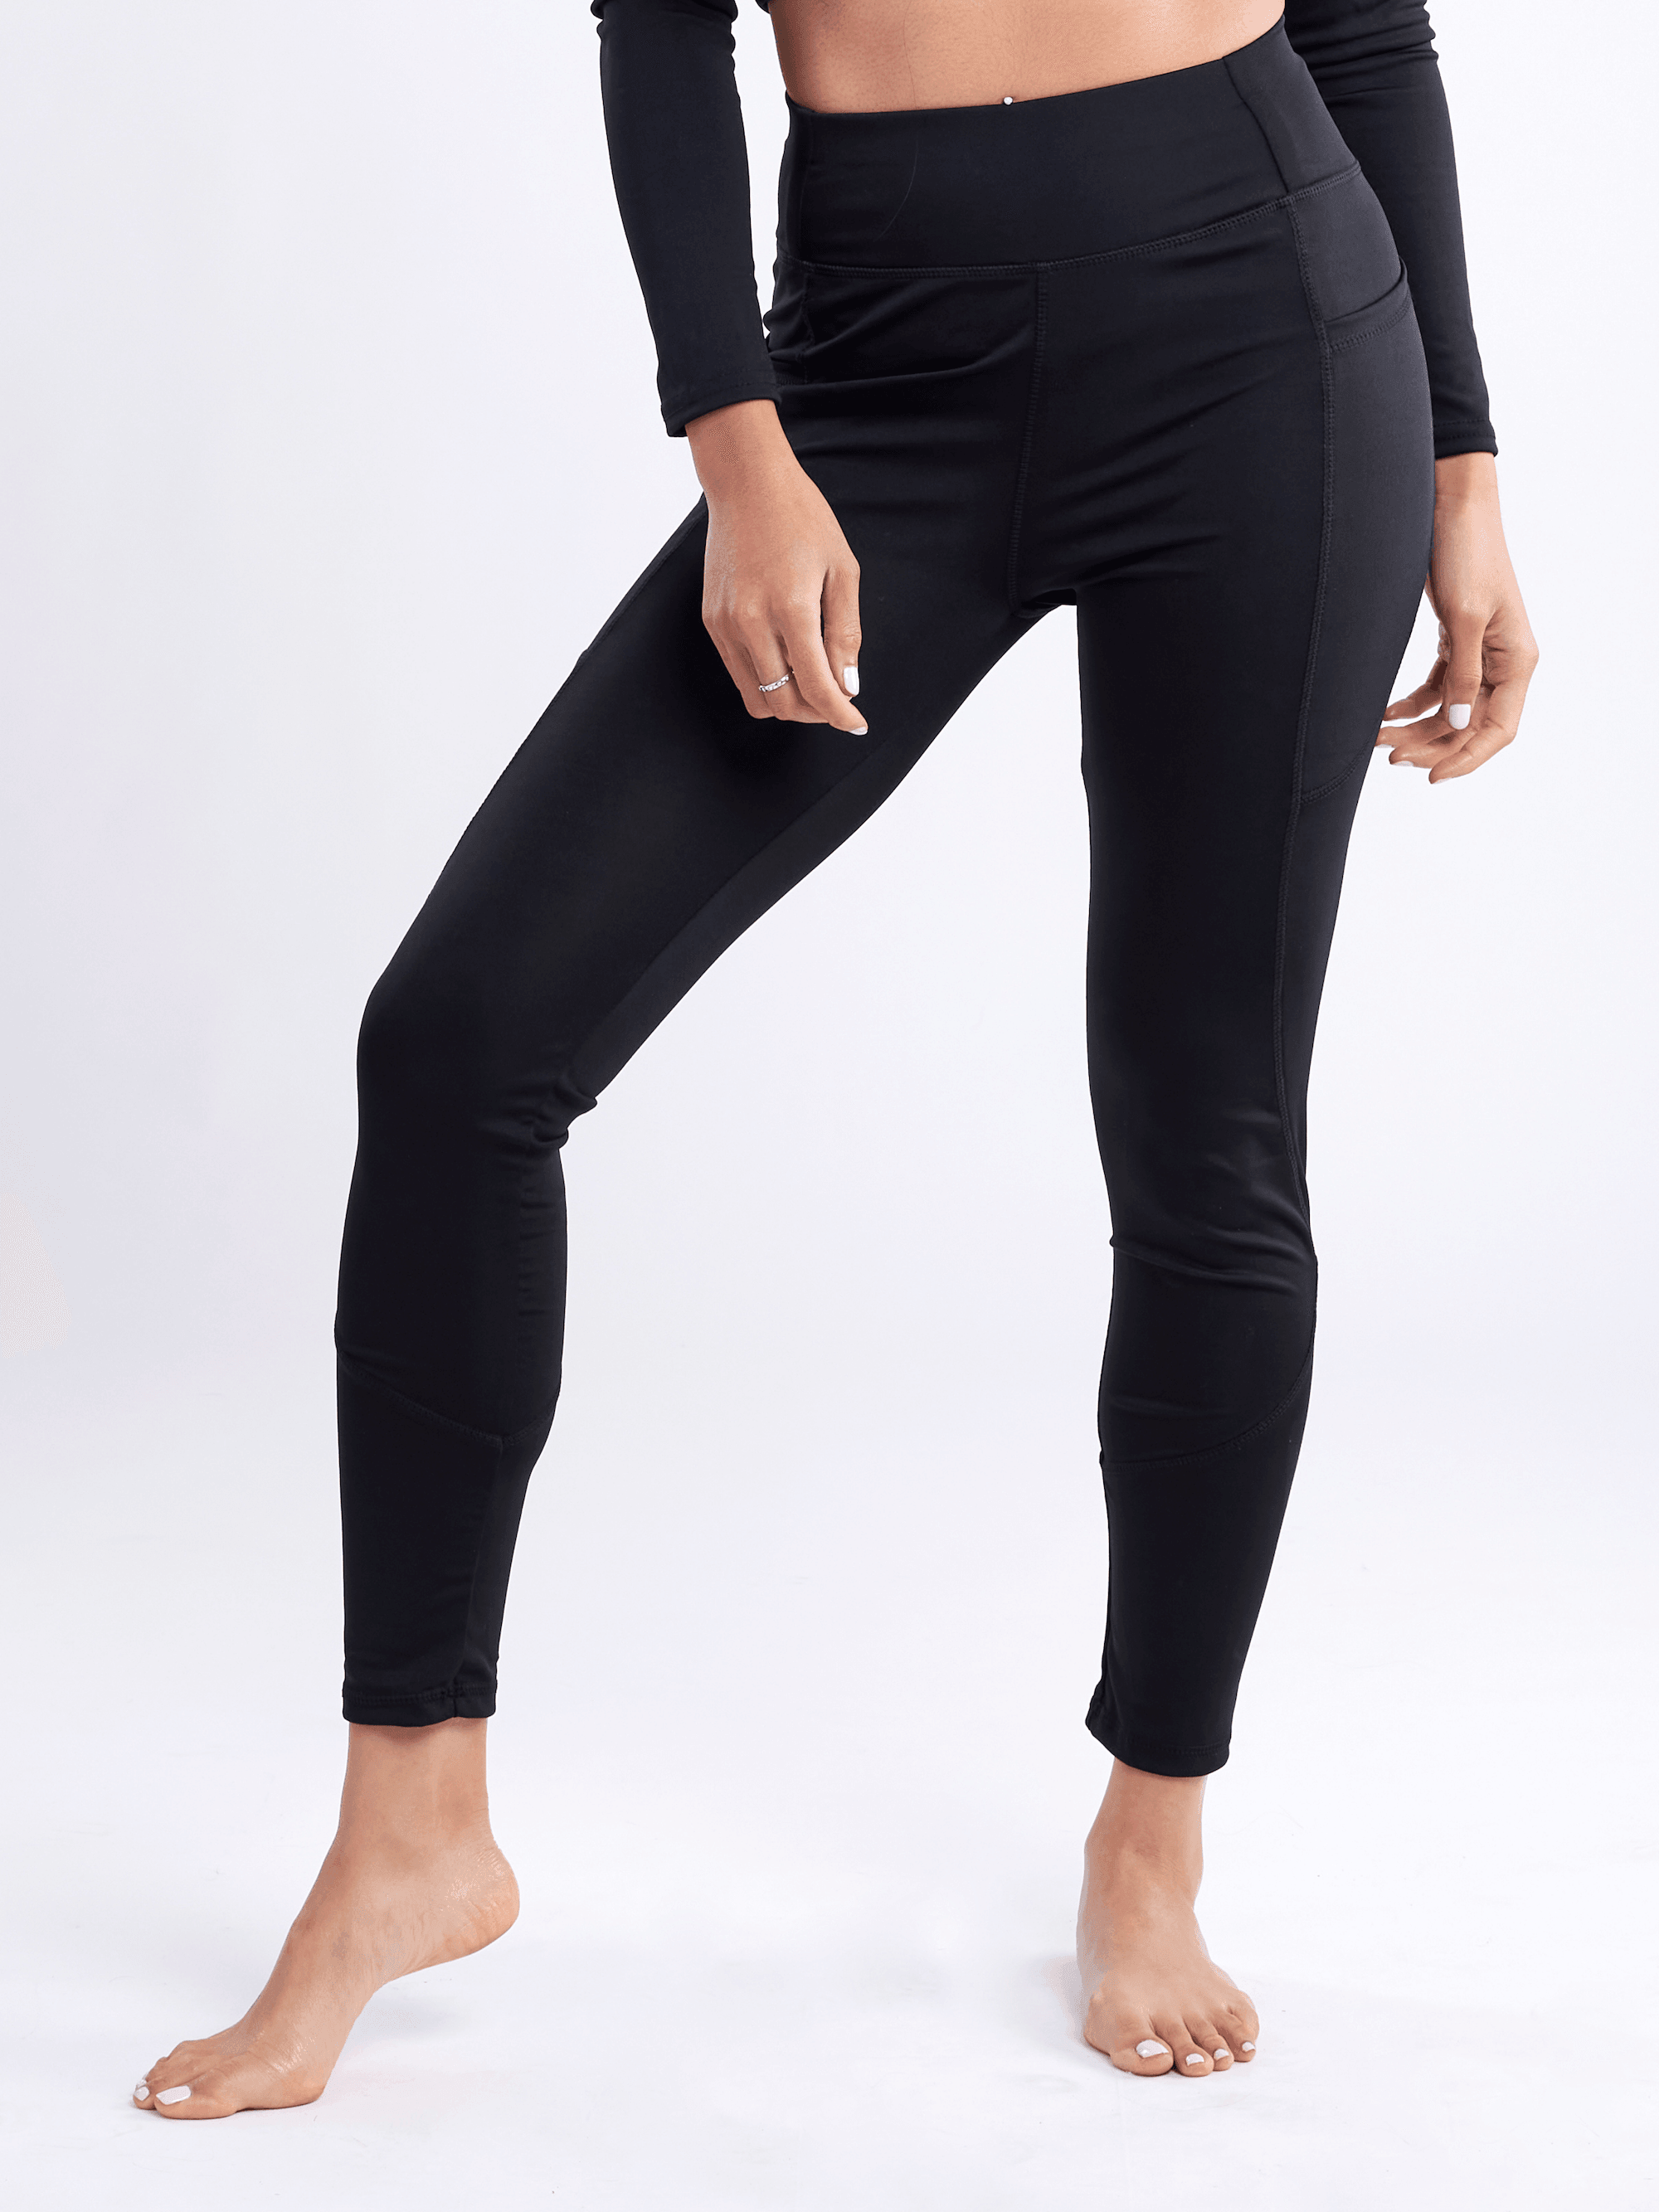 High-Waisted Classic Gym Leggings with Side Pockets - VirtuousWares:Global